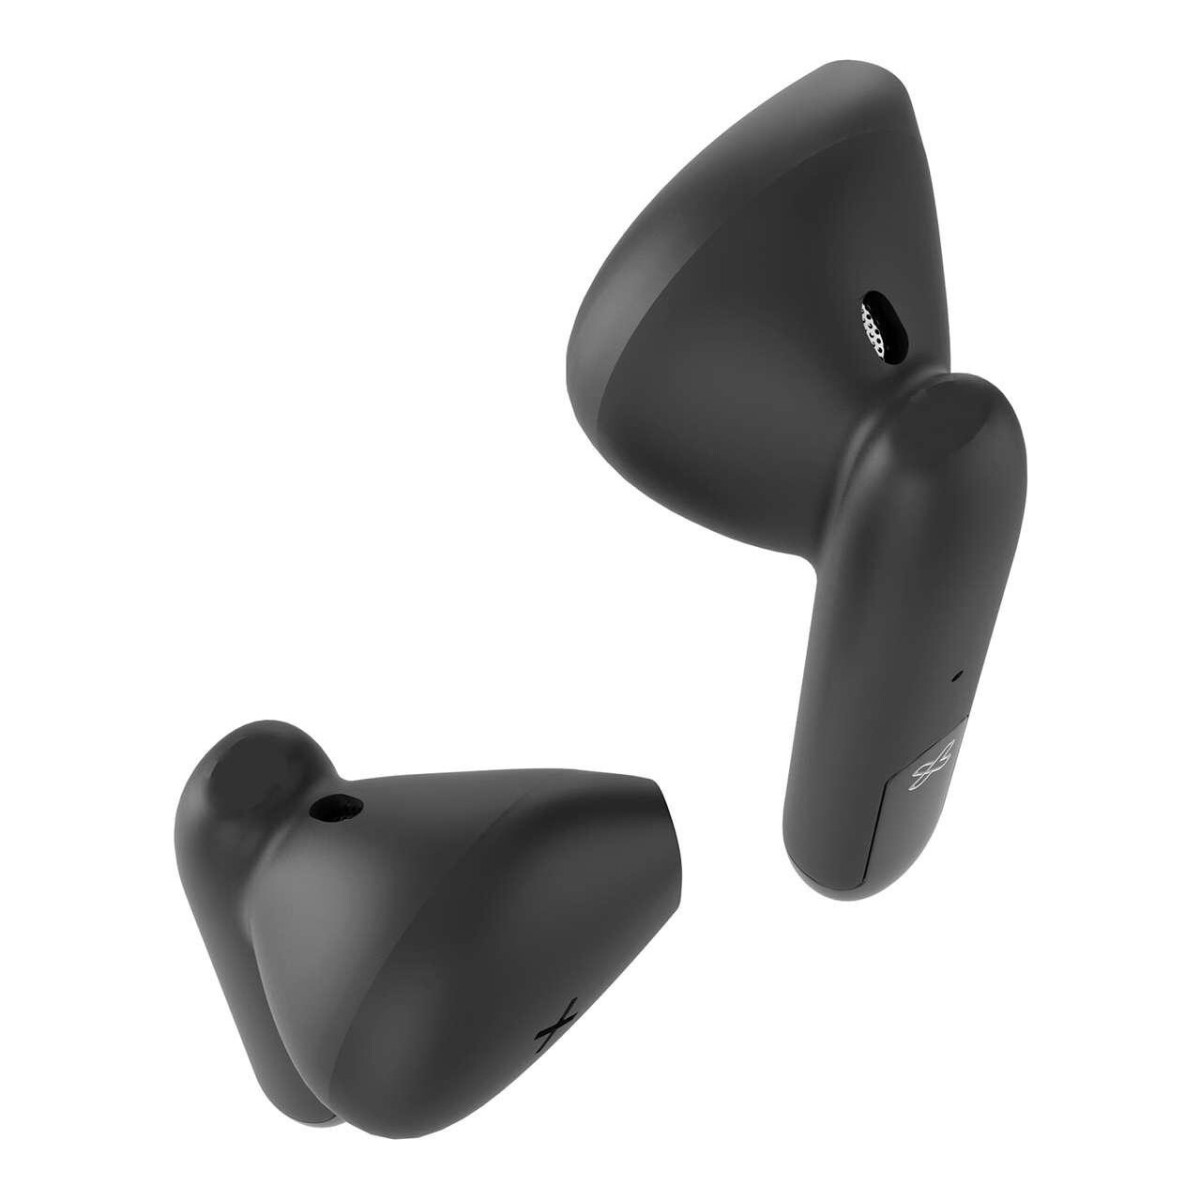 Auriculares inalambricos tws klip xtreme twin touch kte-010 Black